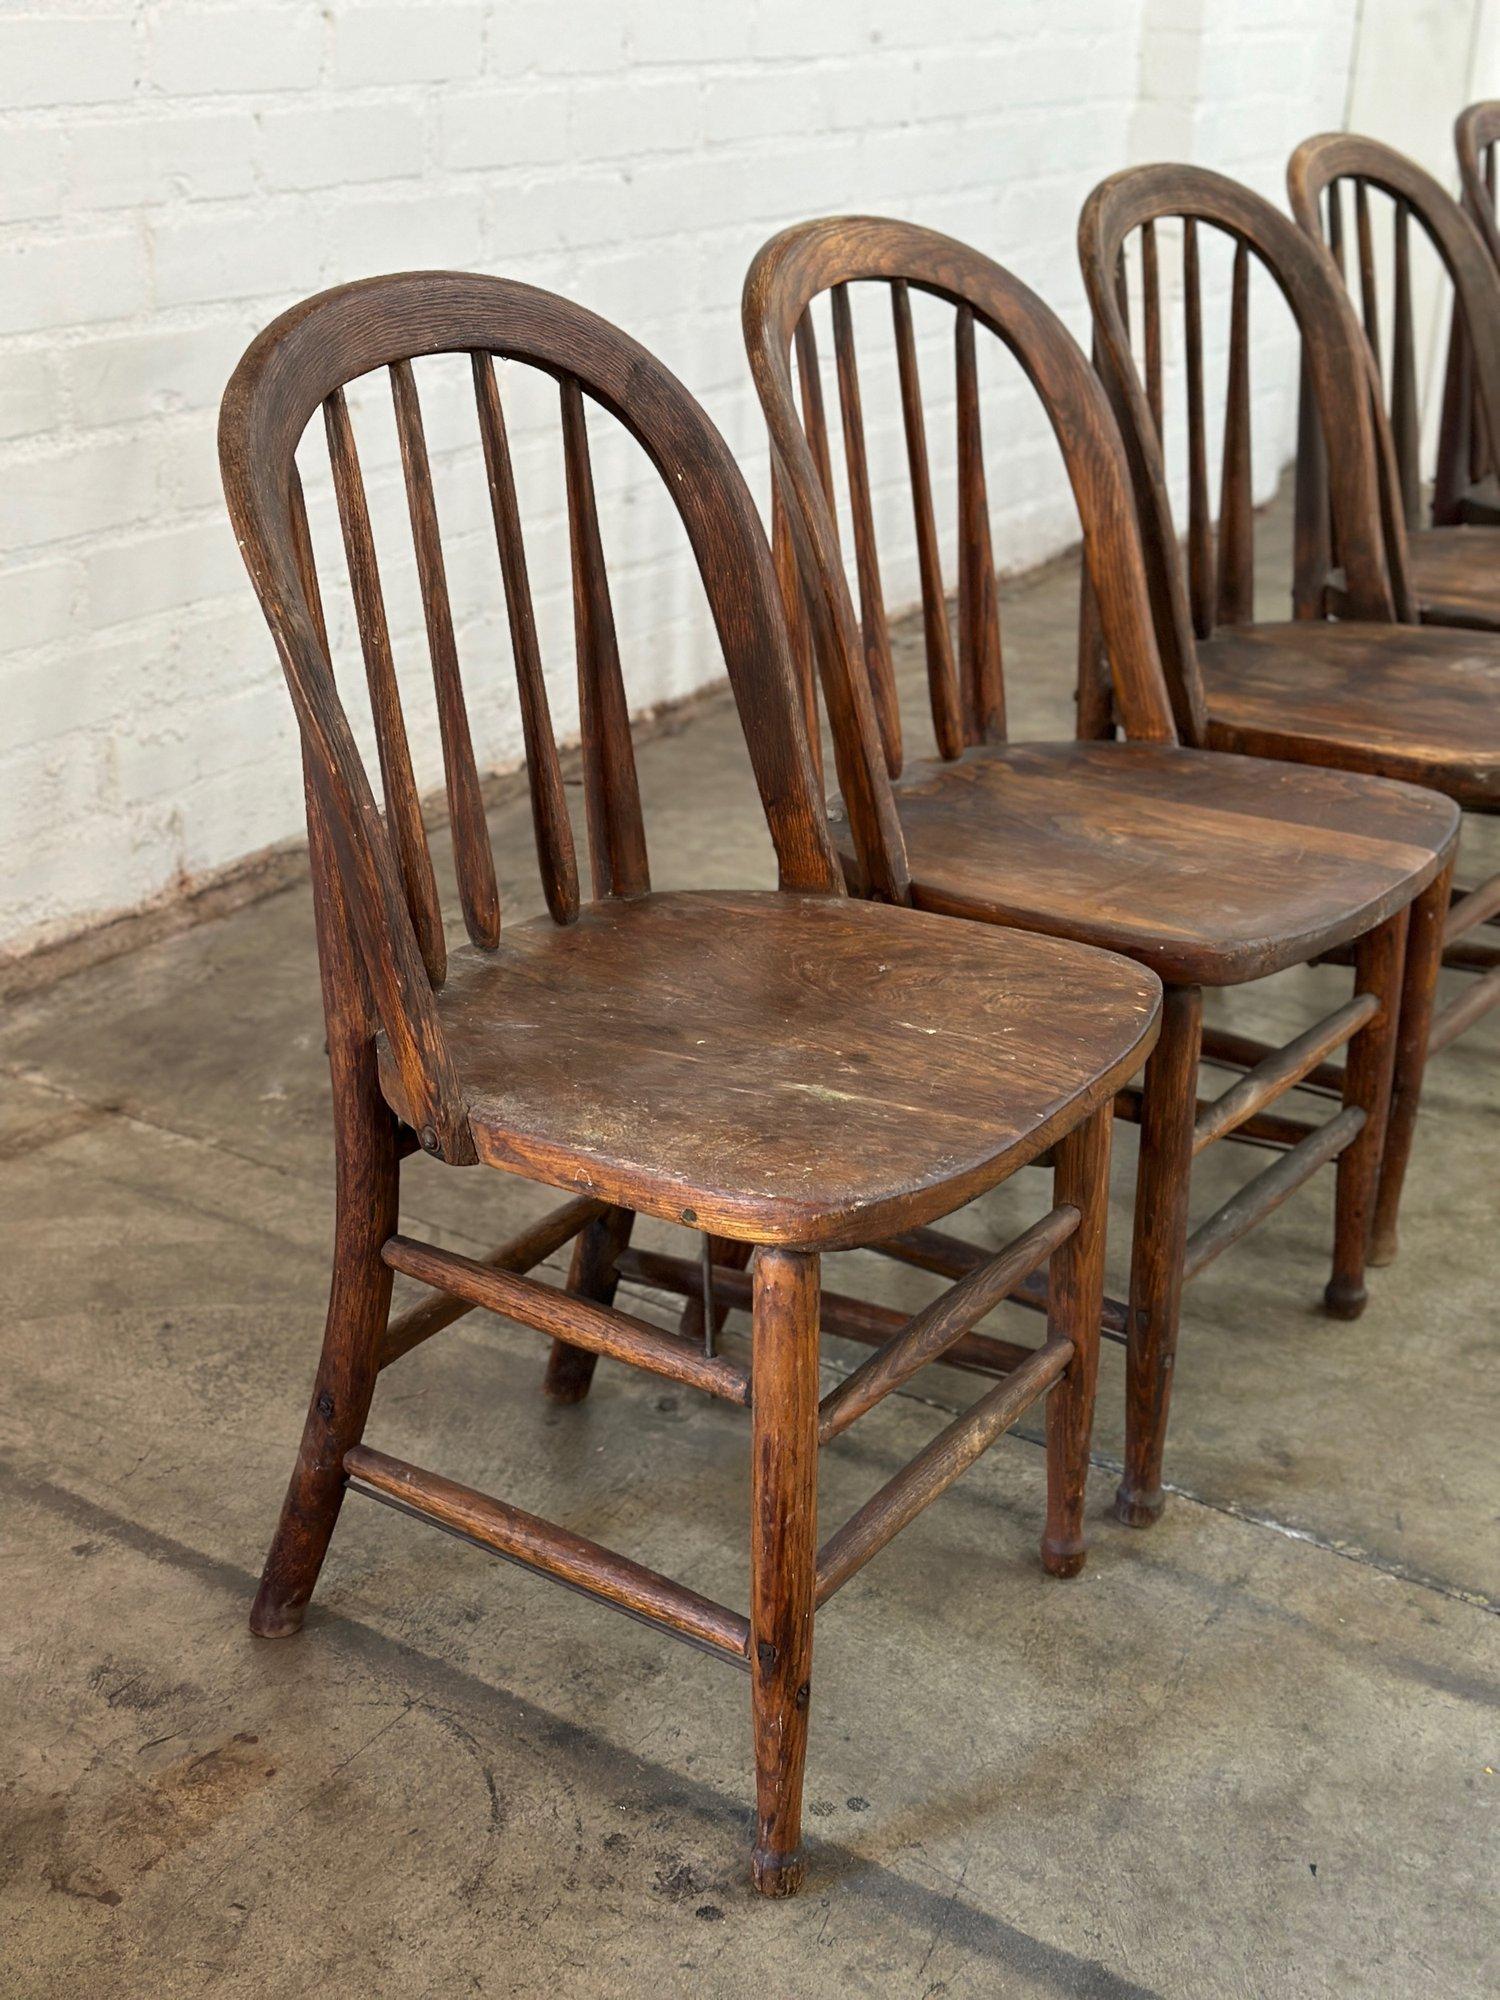 W17 D18 H34 SW17.5 SD16 SH17.5

Vintage Farmhouse Spindle Chairs in AS FOUND vintage condition. Chairs overall show well and feel strong and sturdy. These feature natural age and patina to finish from use. Price is for the set of six. 